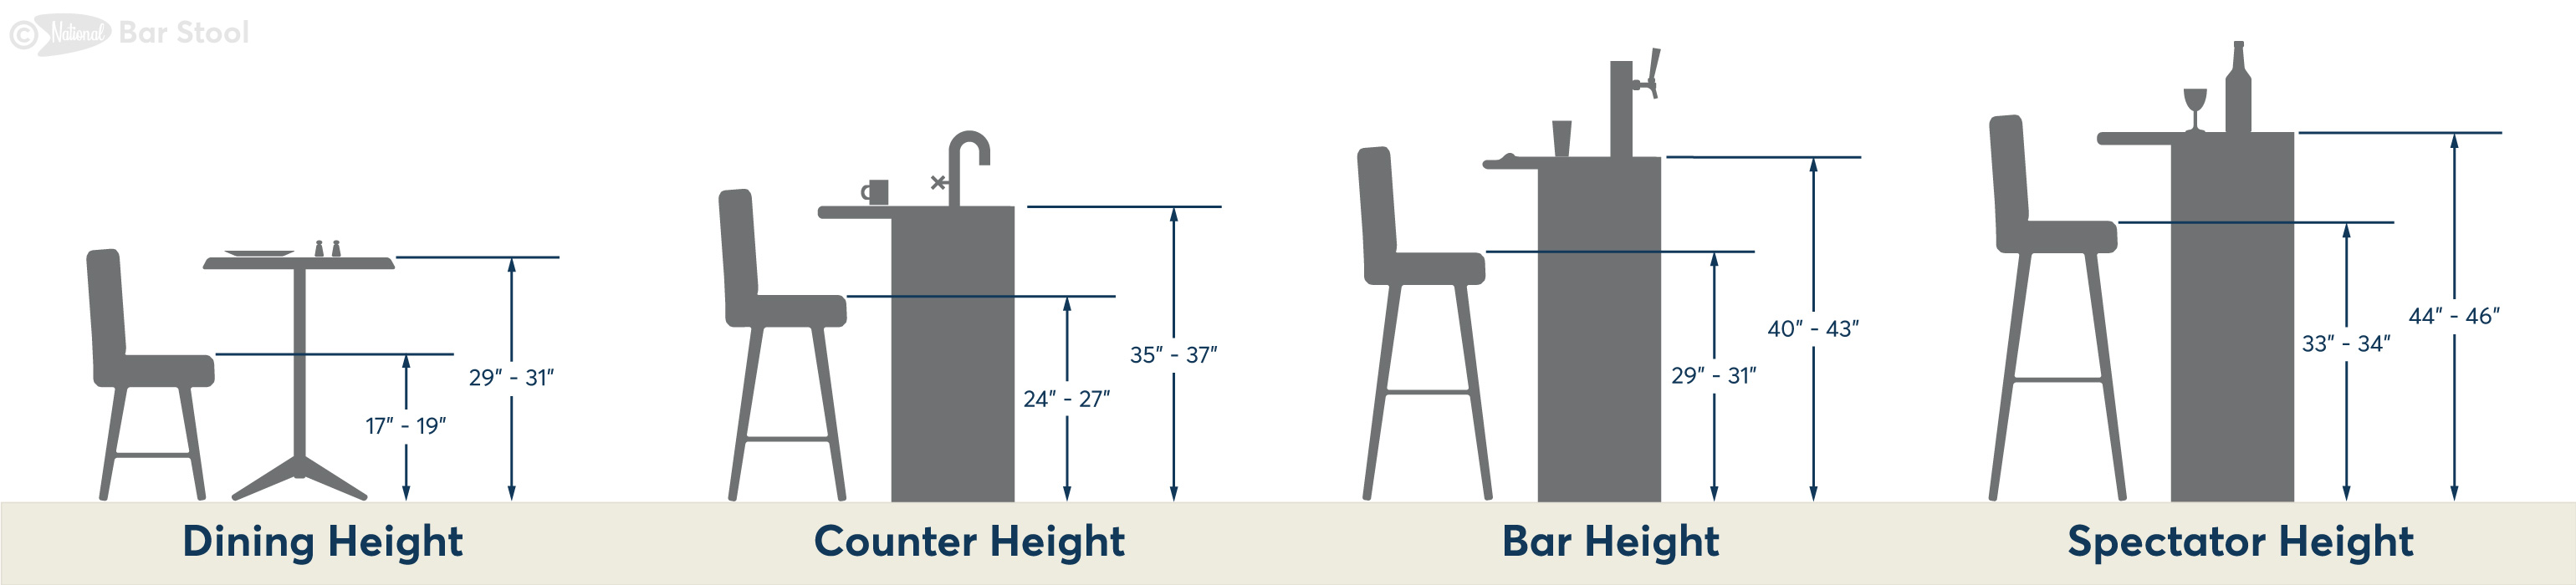 Bar Stool Ing Guide National, How To Determine What Size Bar Stools